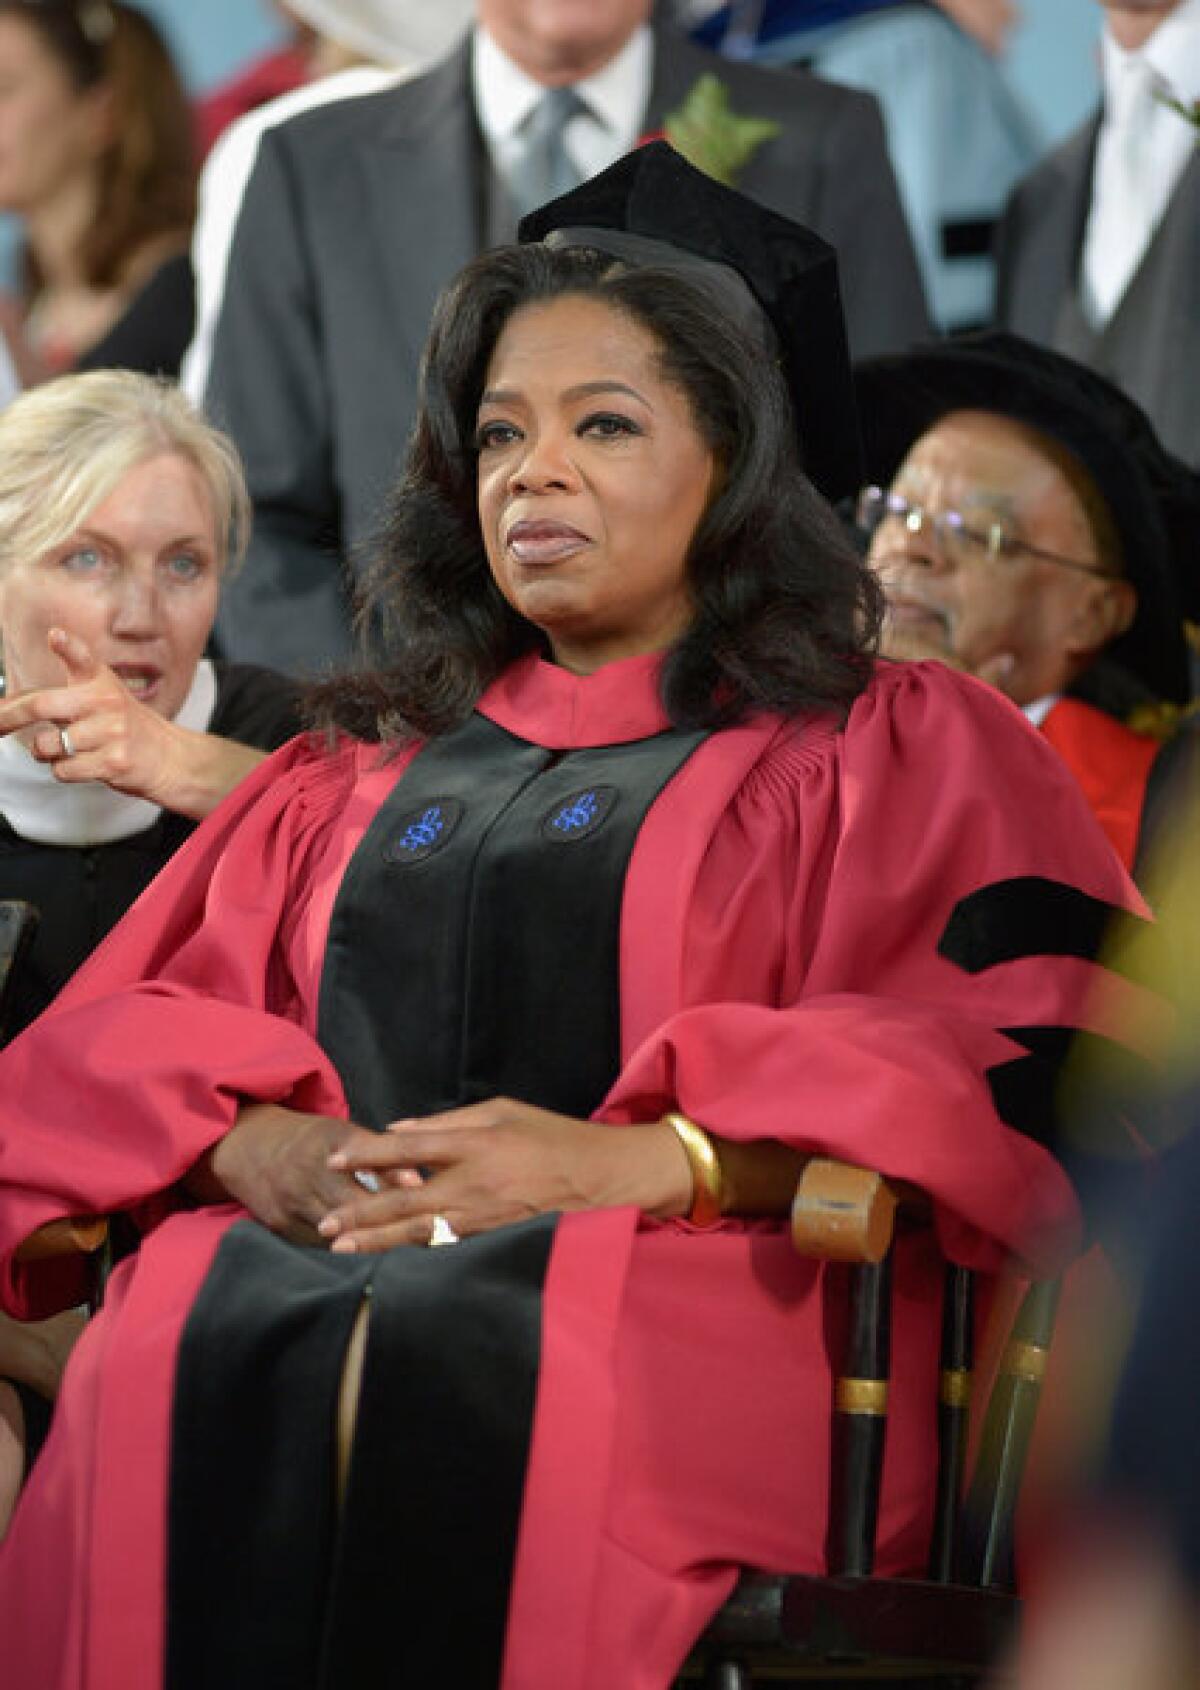 Oprah Winfrey, shown receiving an honorary doctorate last month at Harvard University, tops Forbes' list of the 100 most powerful celebrities.